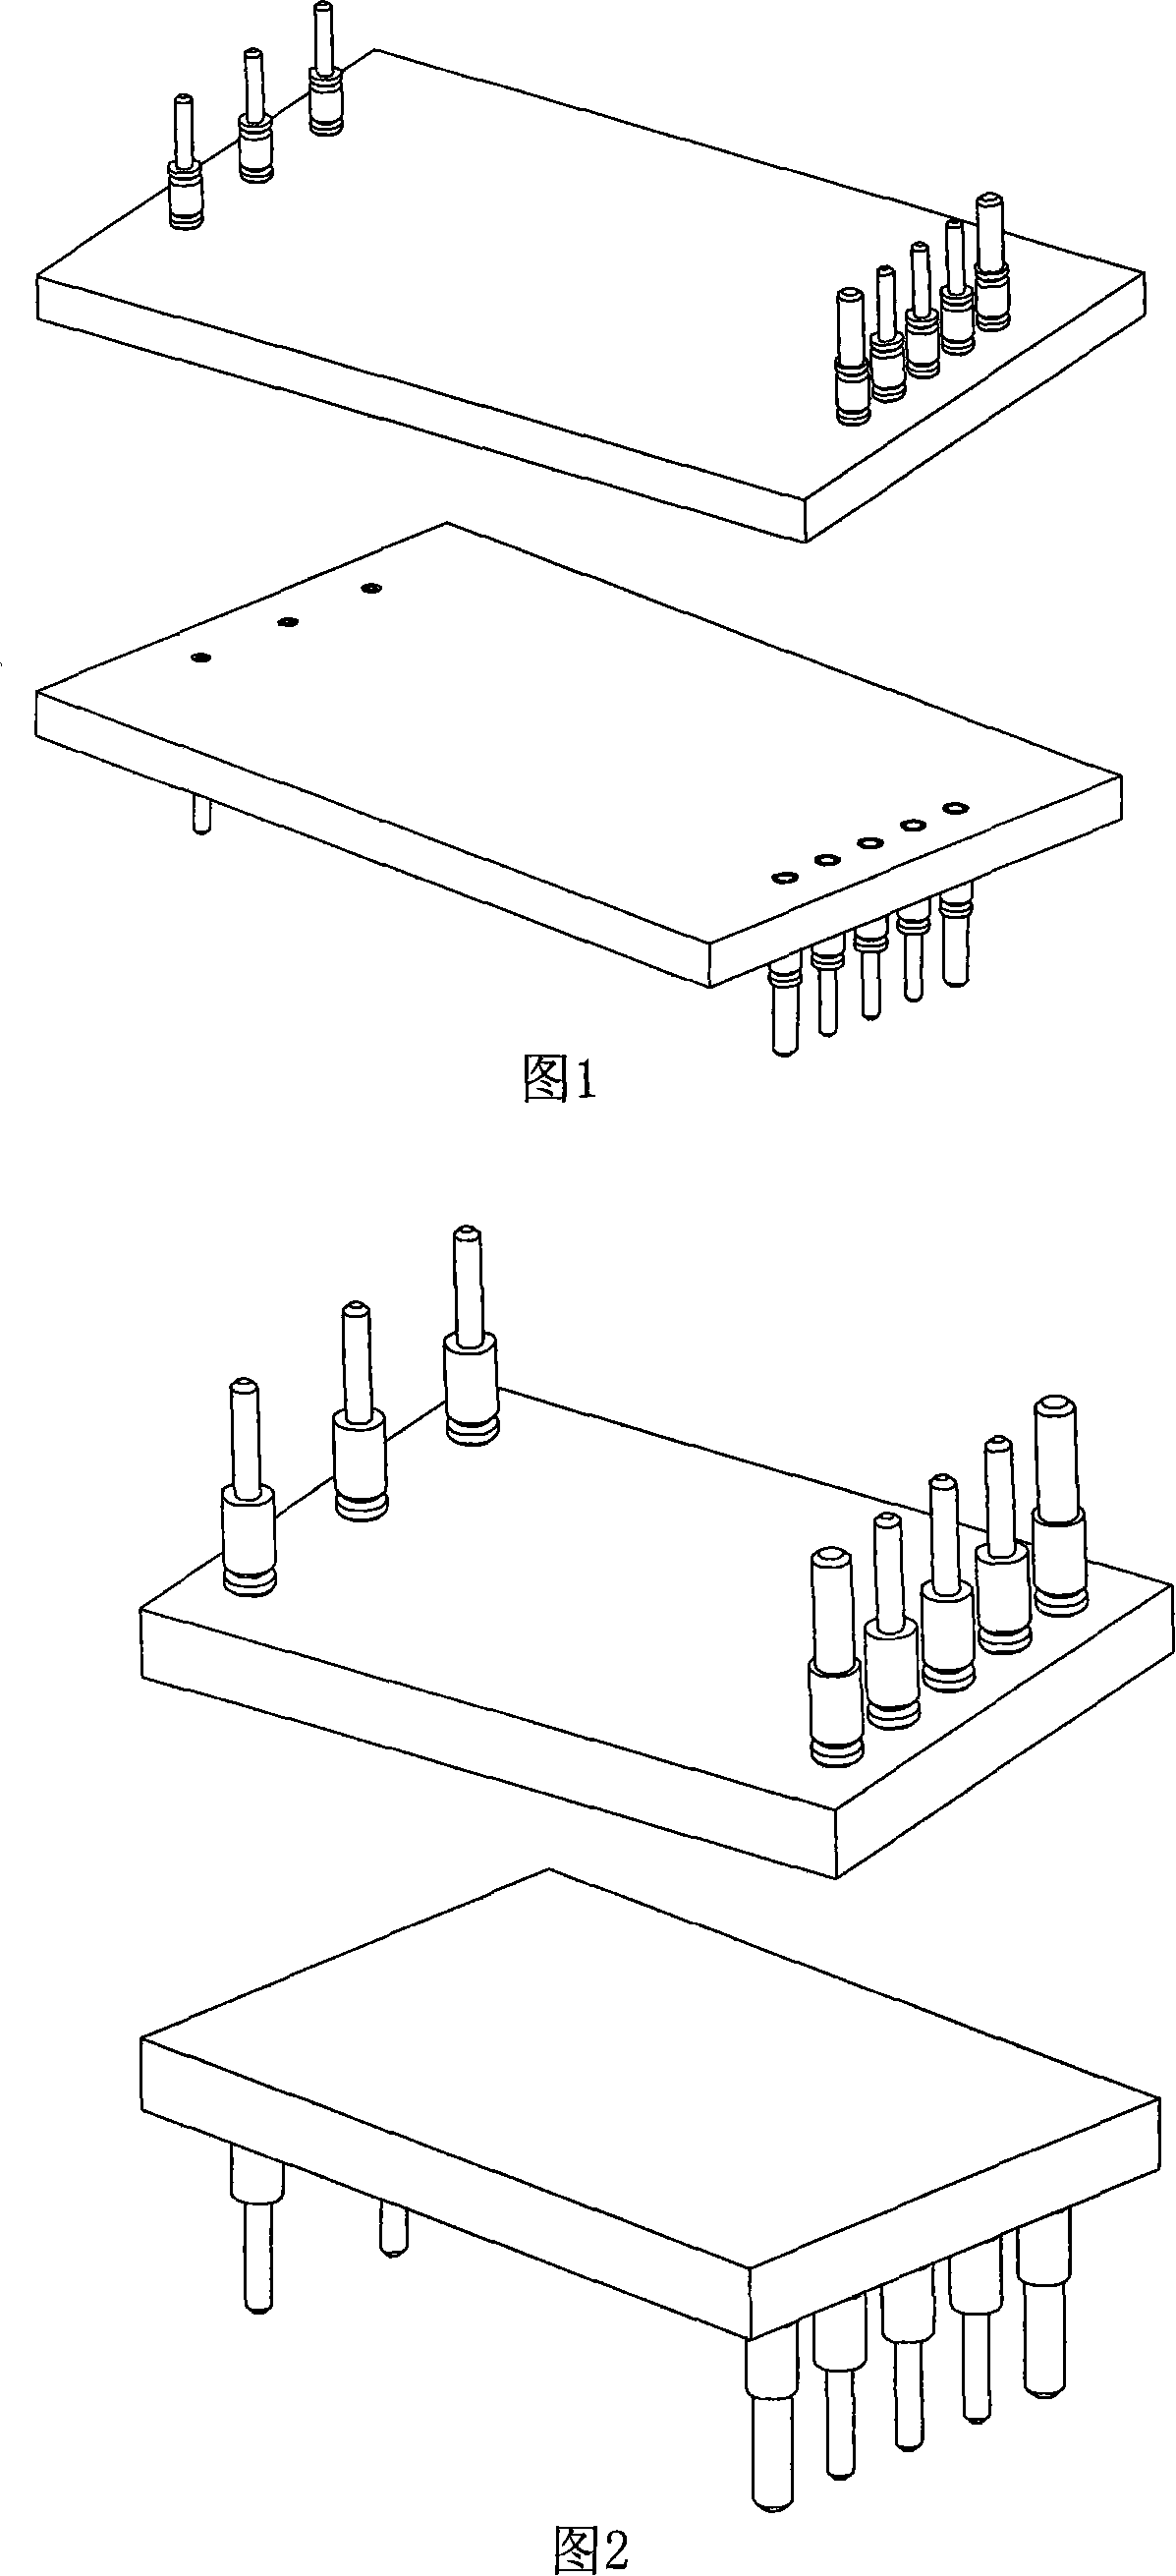 Module power supply base pin structure